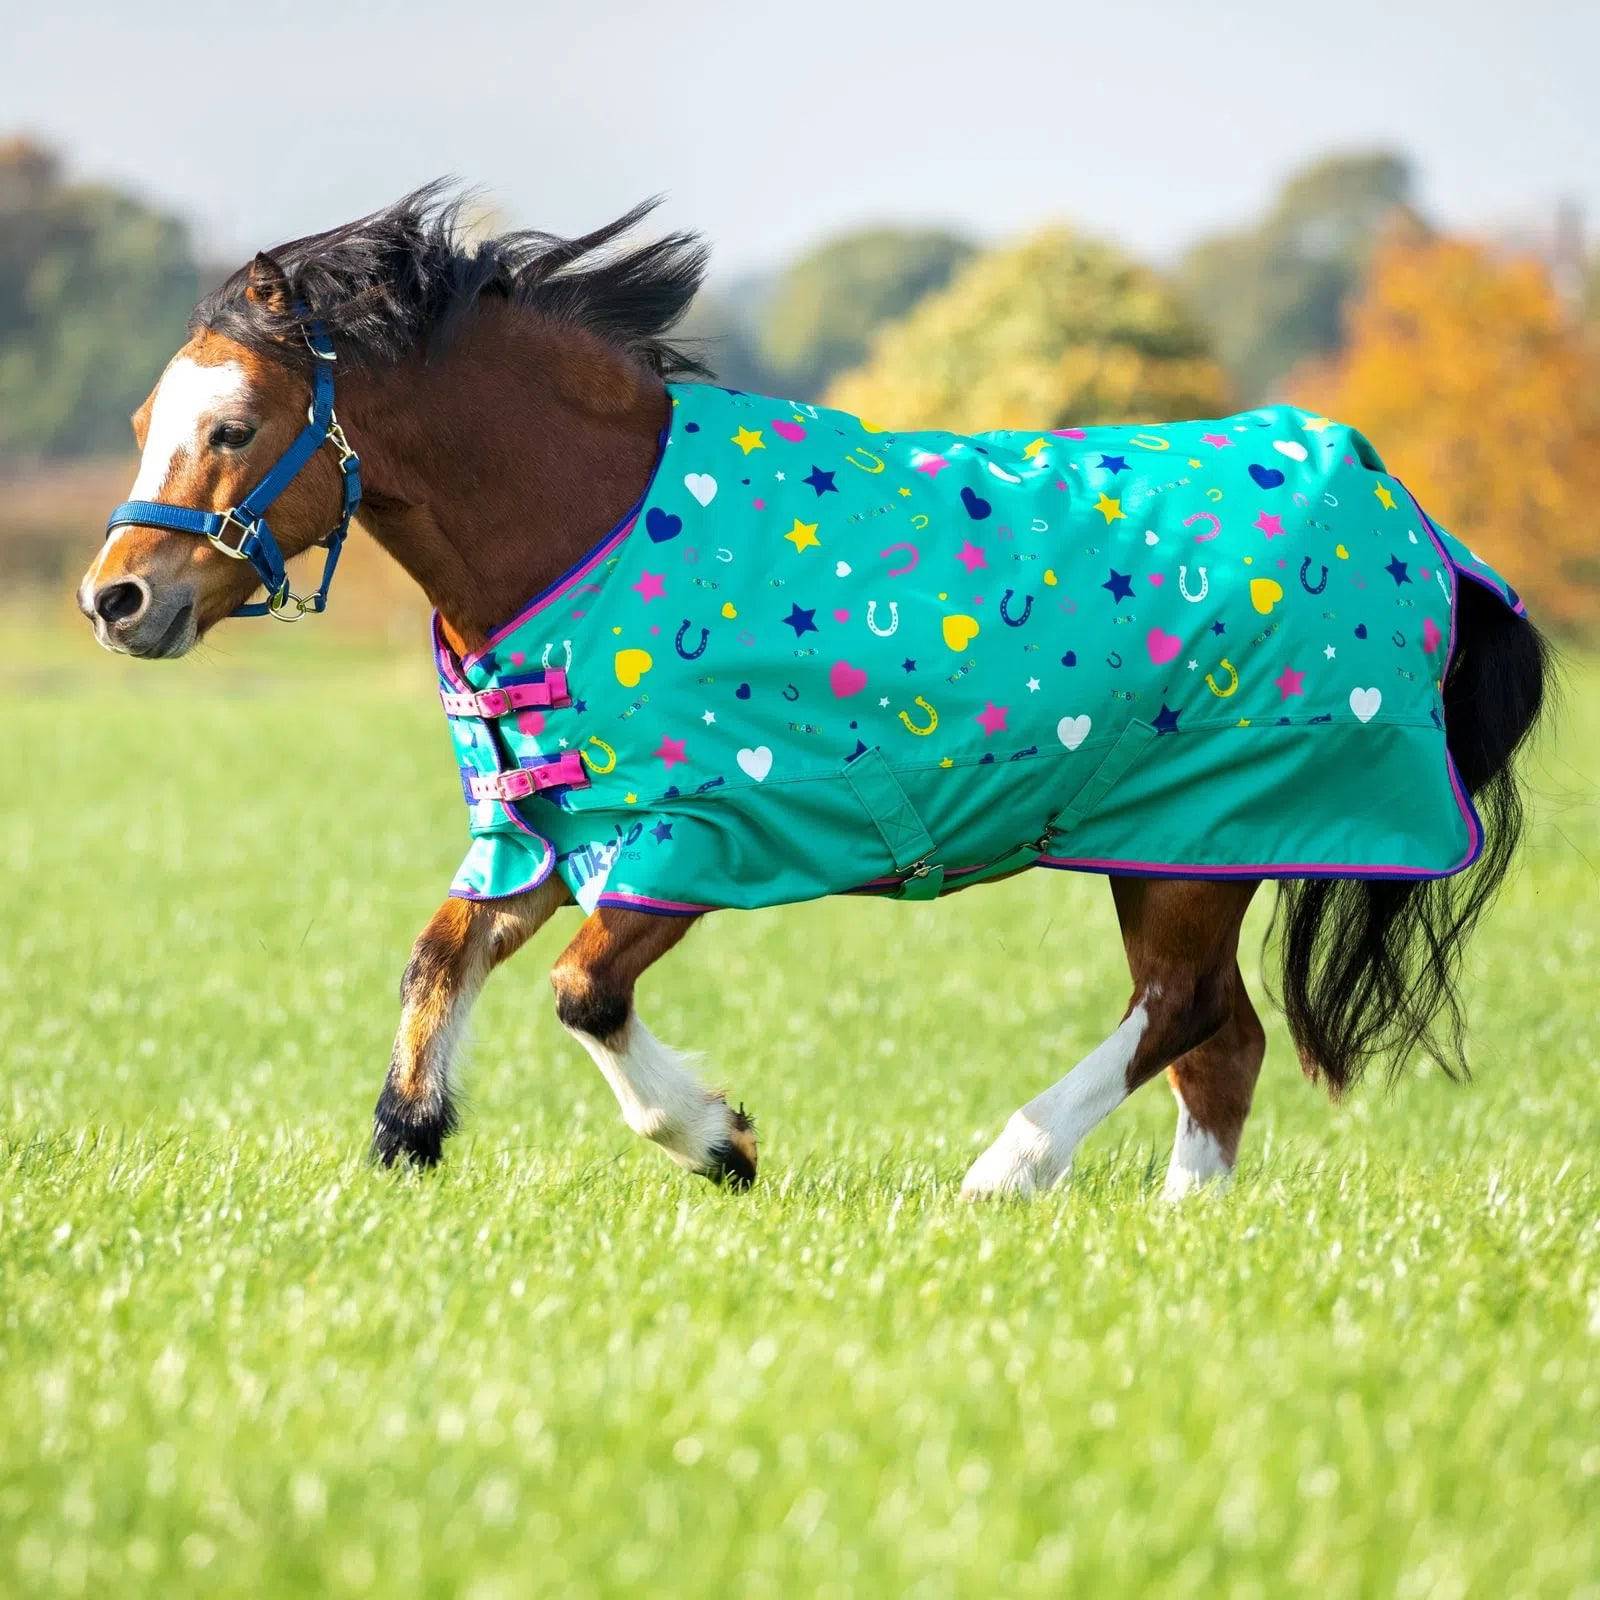 Shires Tikaboo Lite Turnout Sheet- CLEARANCE